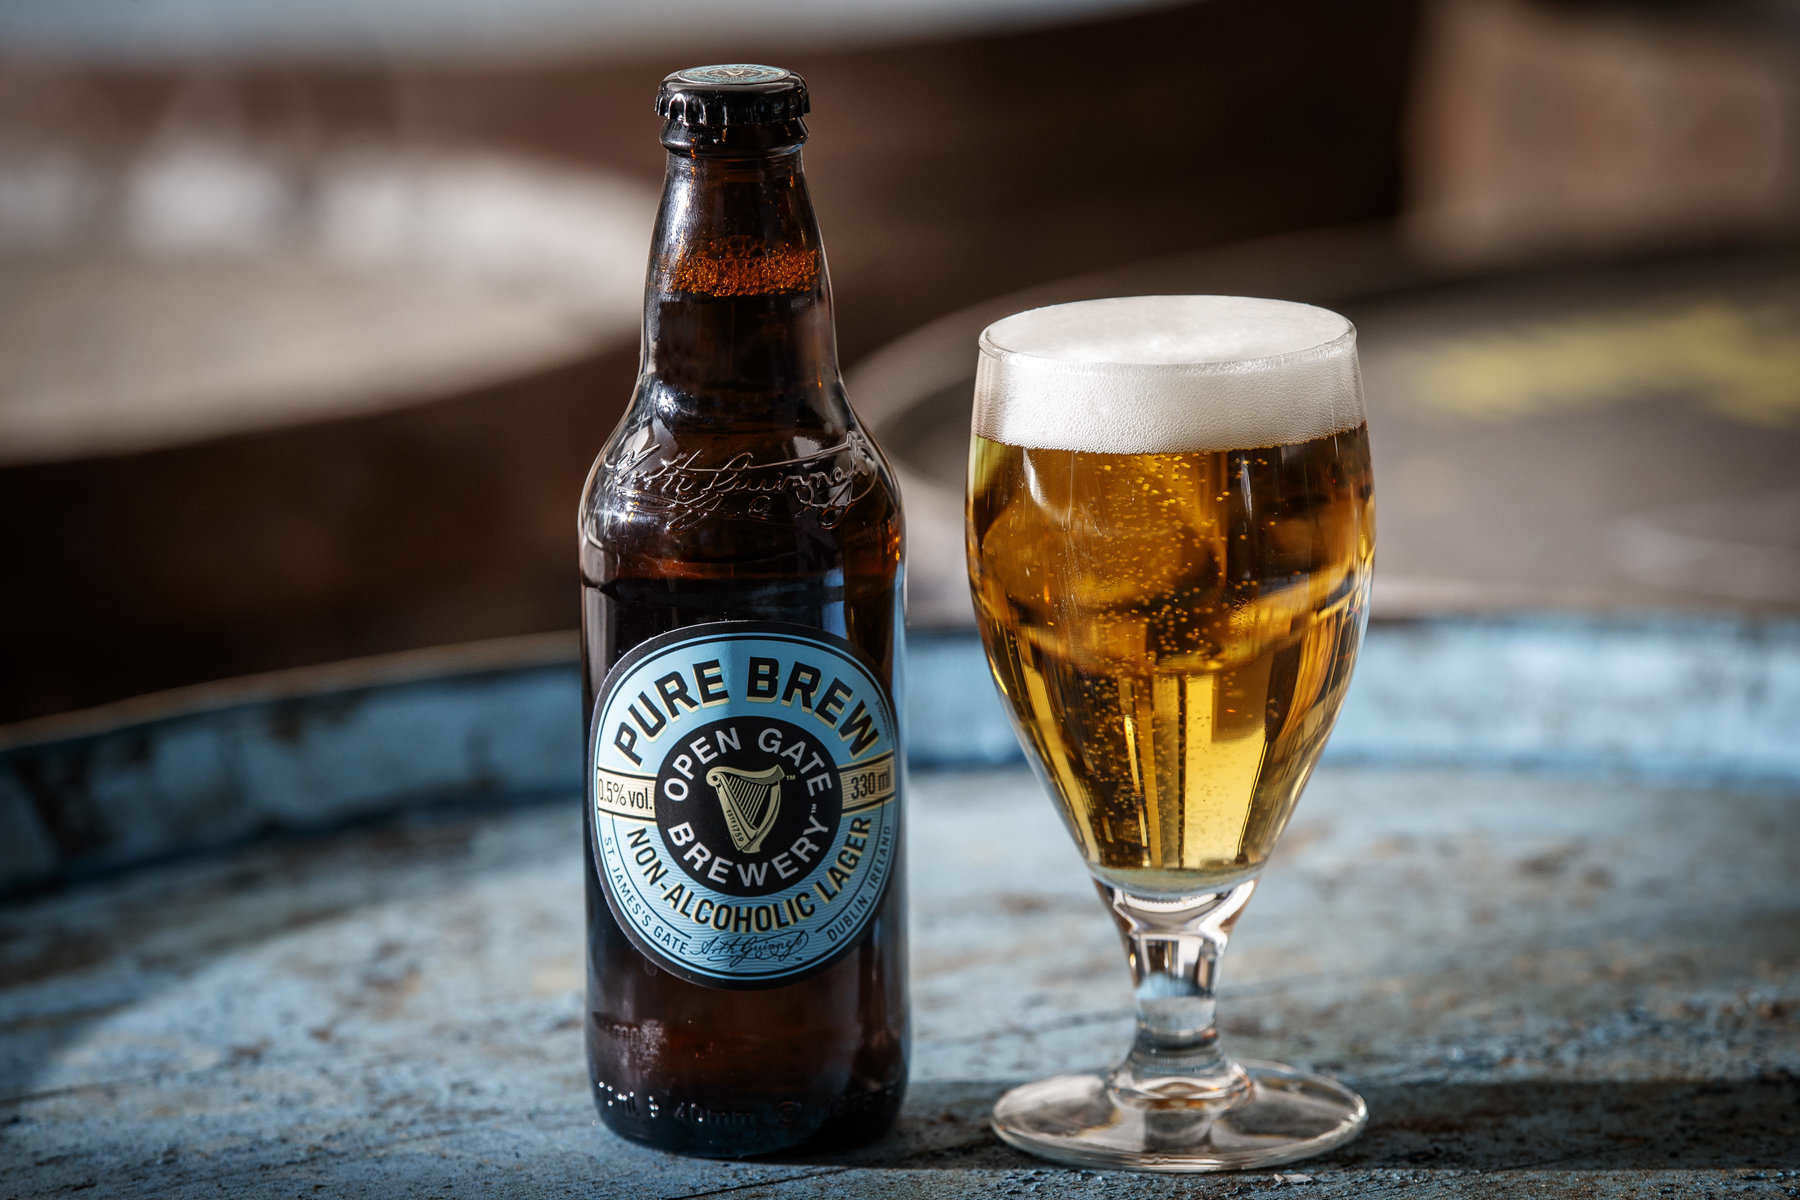 Diageo Ireland has launched ‘Open Gate Pure Brew’ non-alcoholic lager from the Guinness Open Gate Brewery to 250 Dublin pubs initially.